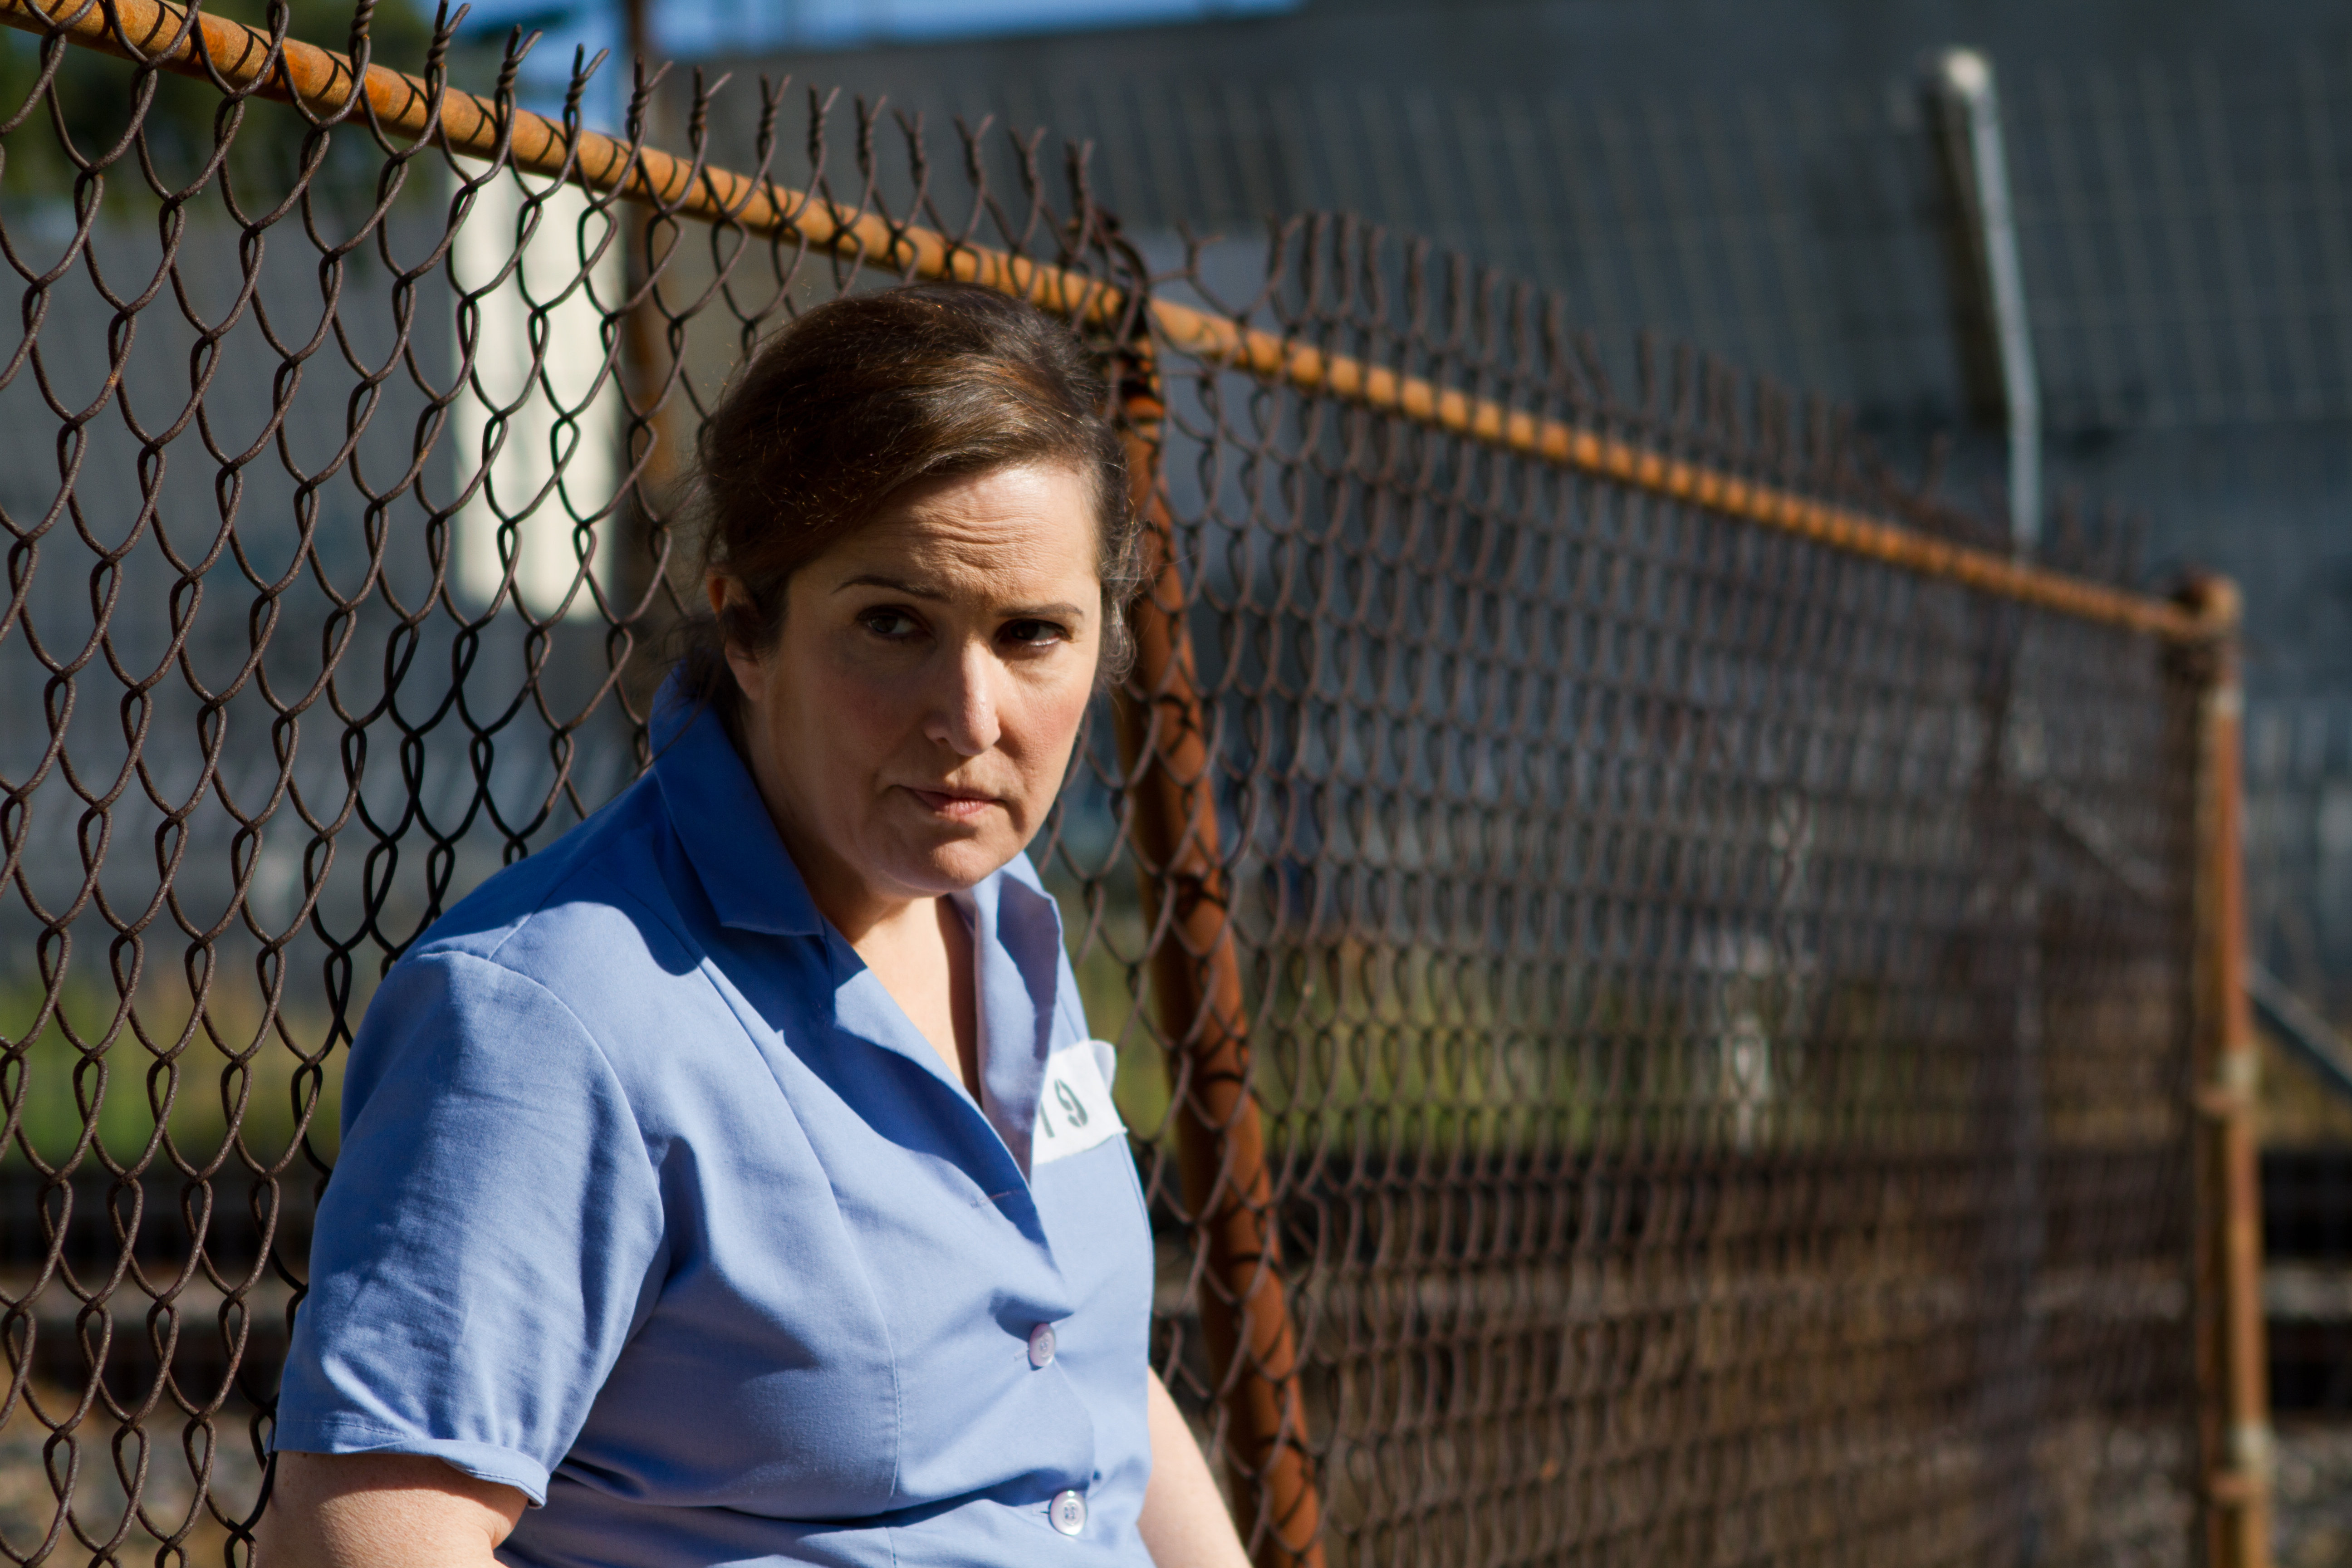 Actress/Director Jillian Armenate leans against the prison yard fence for Kittens in a Cage.